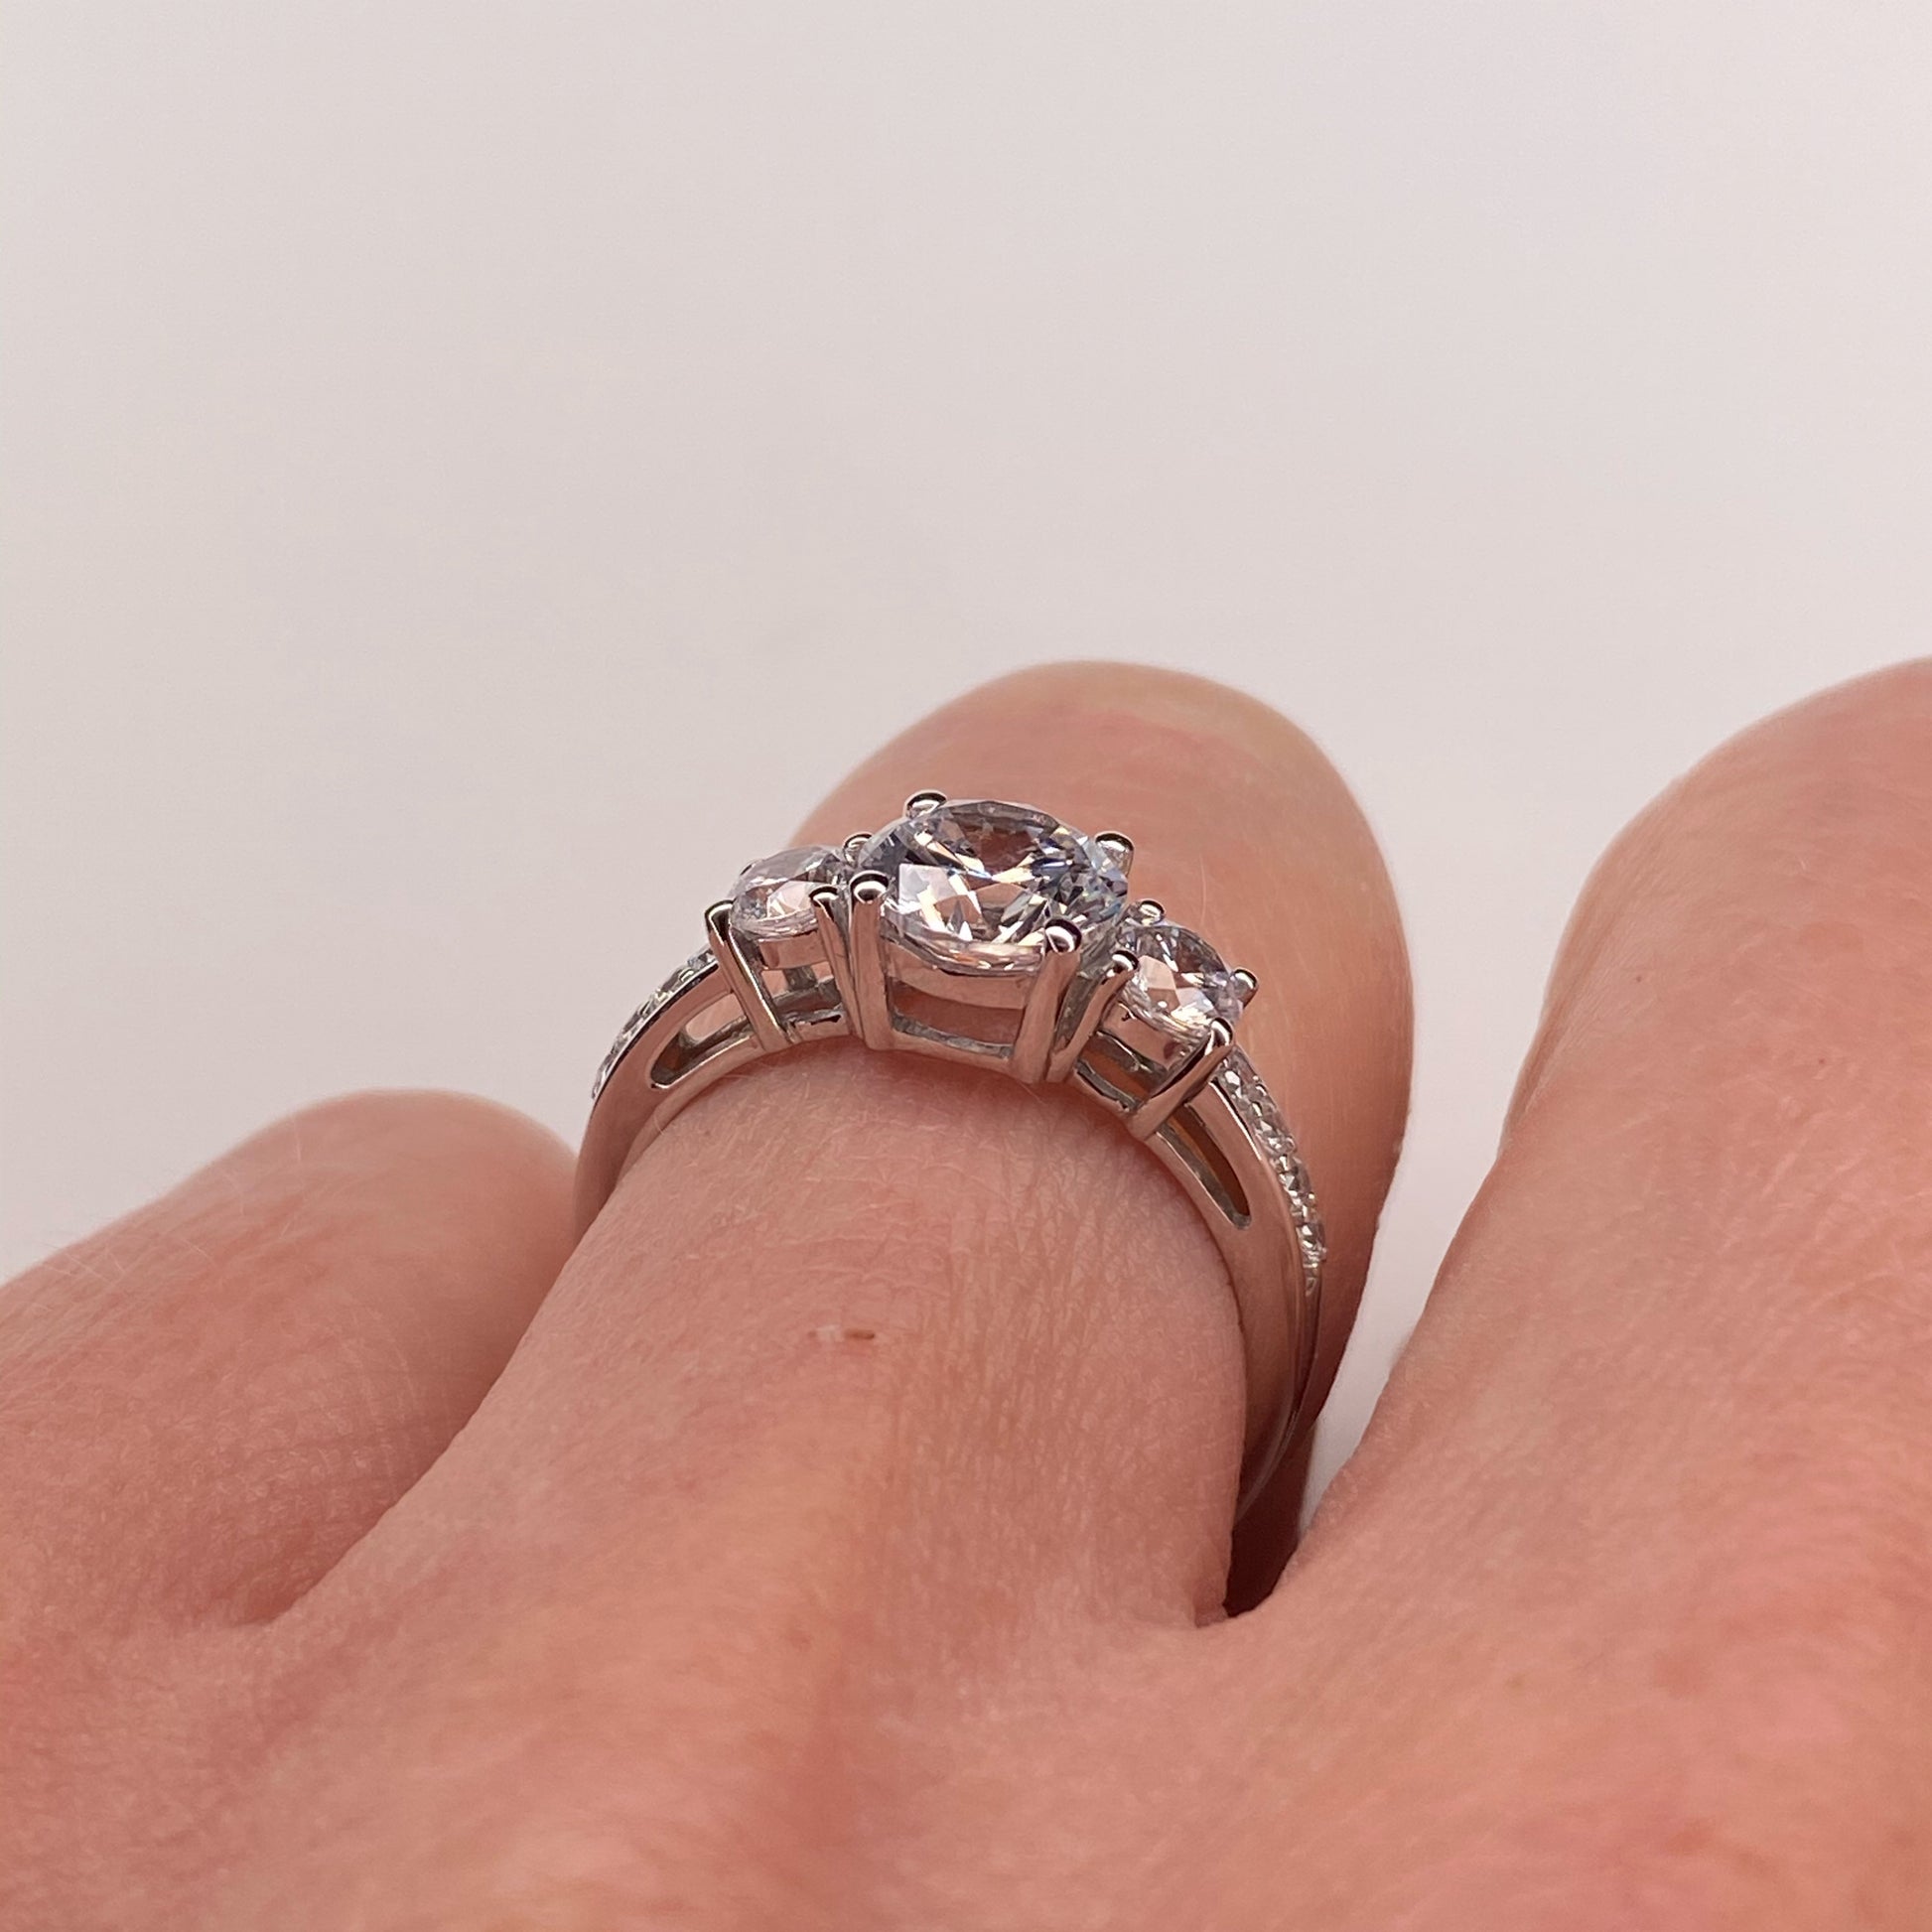 9ct White Gold CZ Trilogy Ring with Pavé - John Ross Jewellers